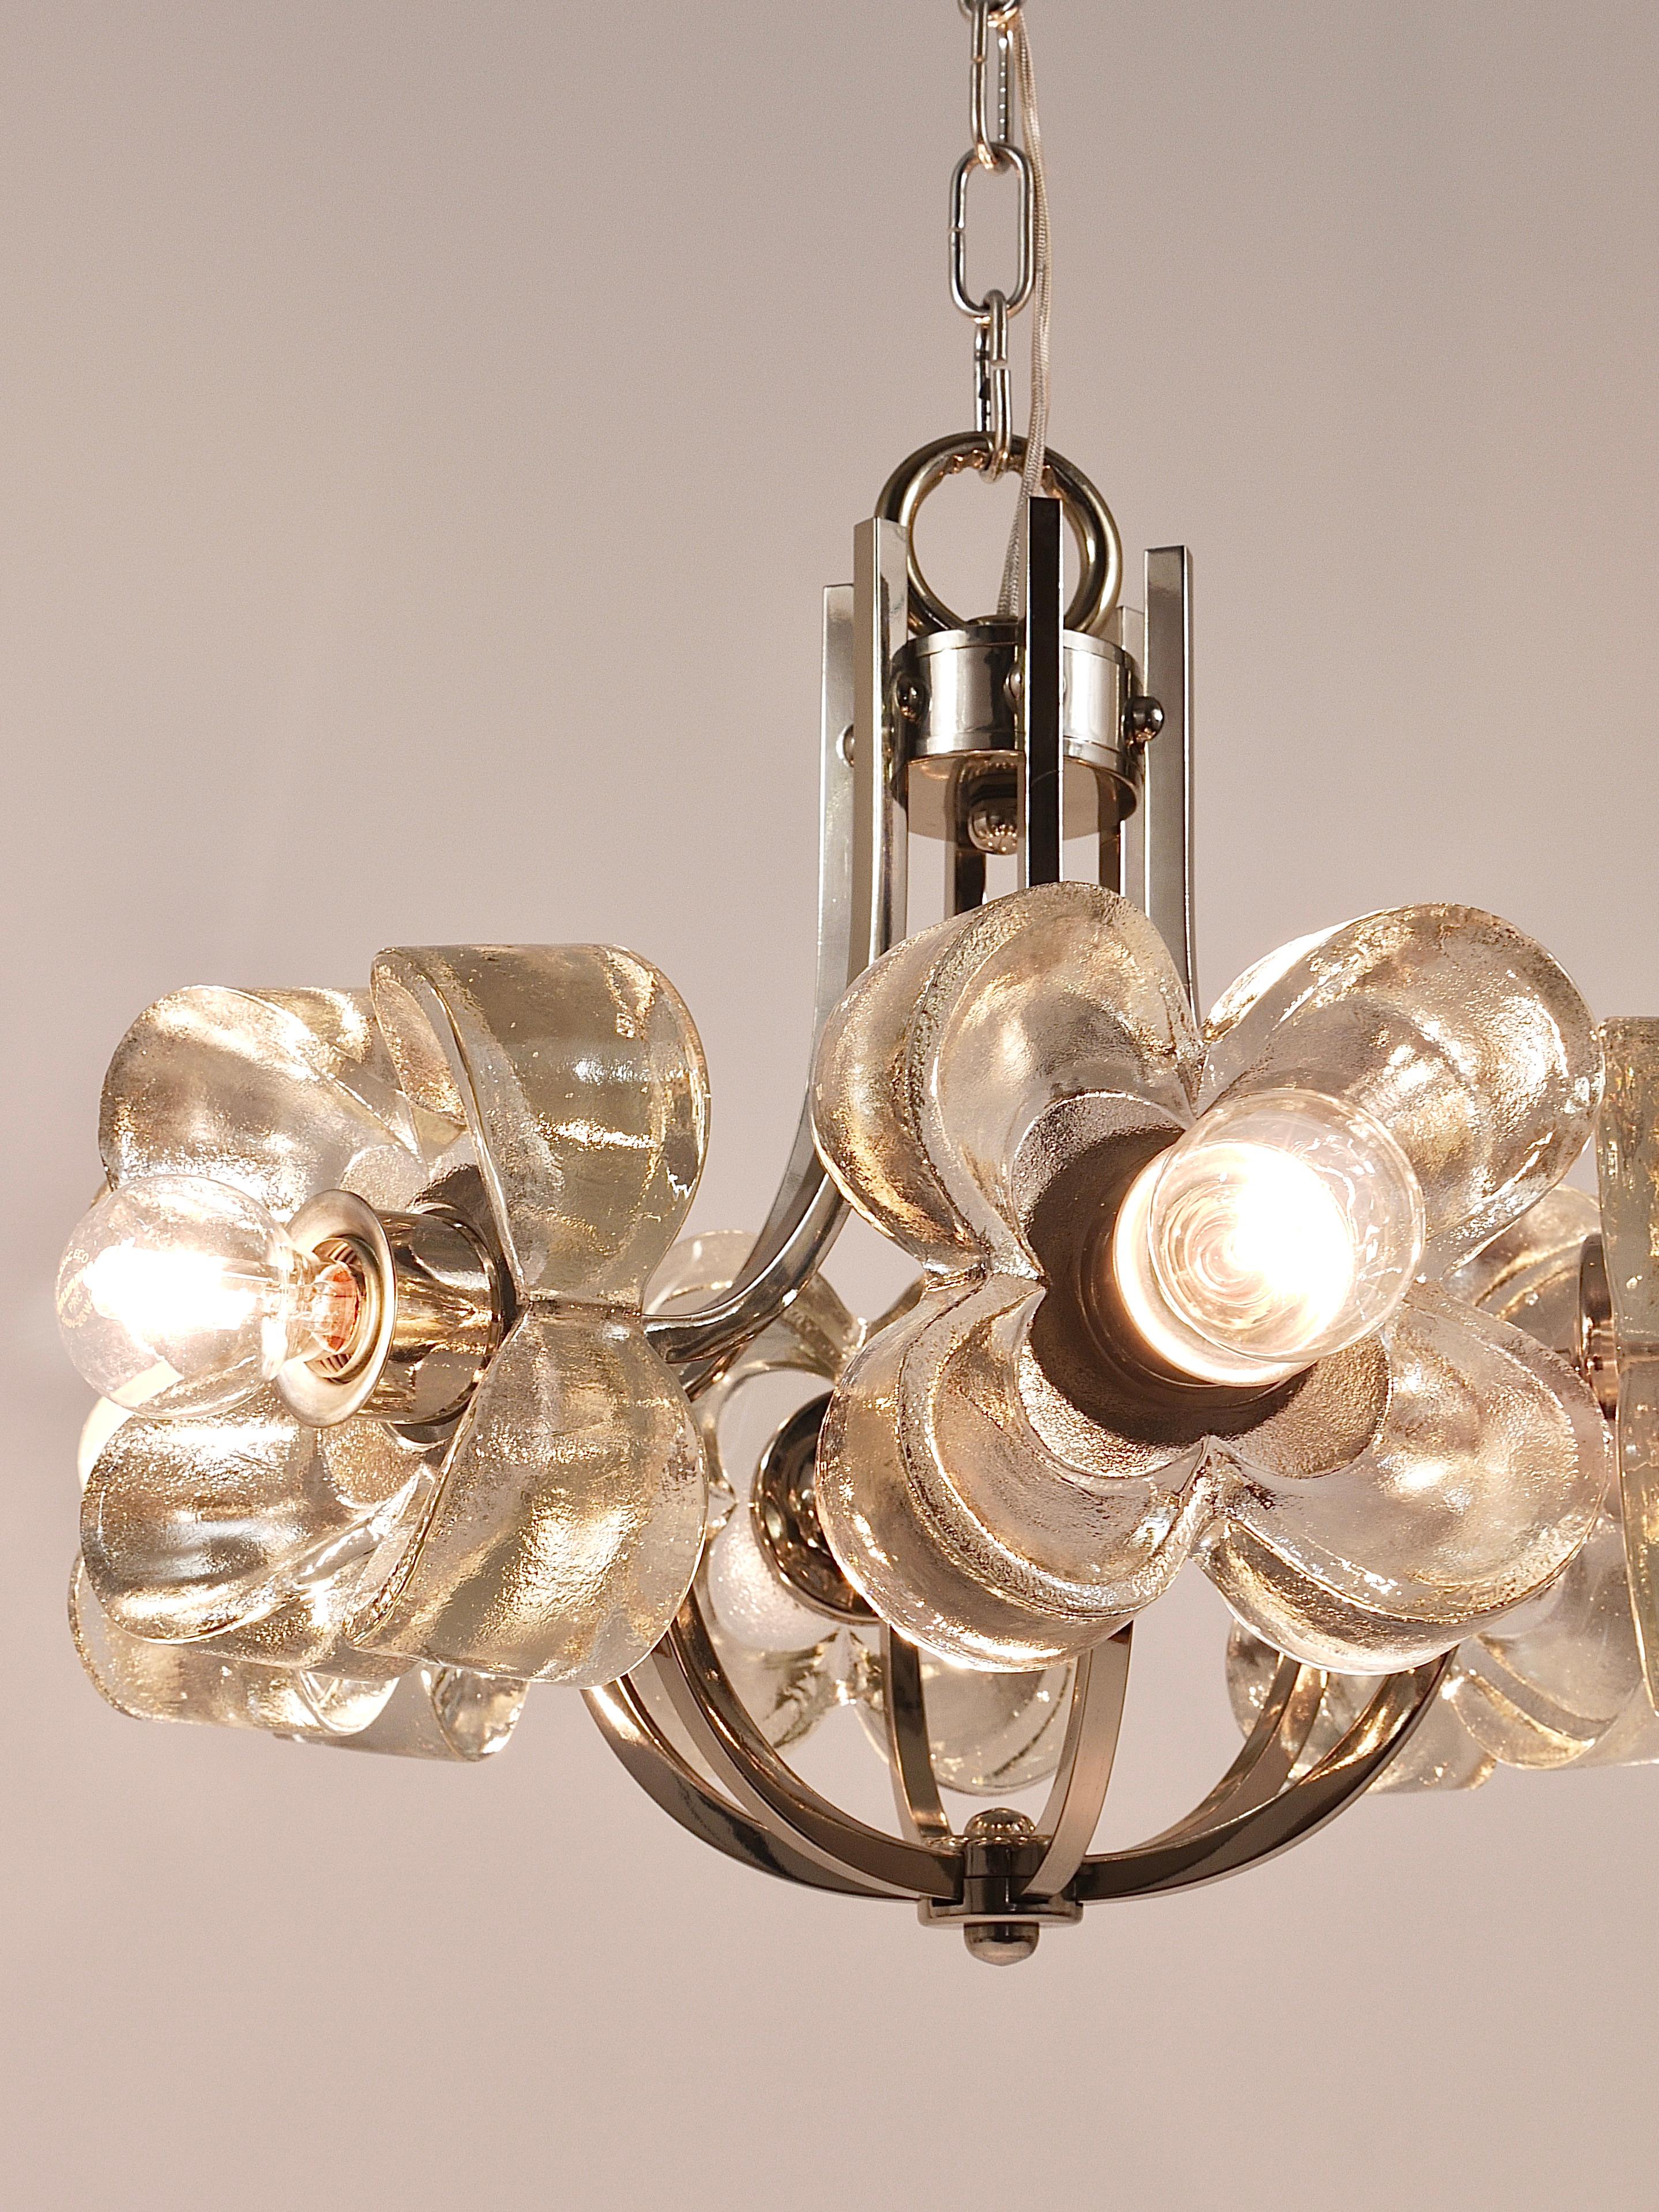 Kalmar Style Crystal Glass Flower Pendant Chandelier by Sische, Germany, 1970s For Sale 2